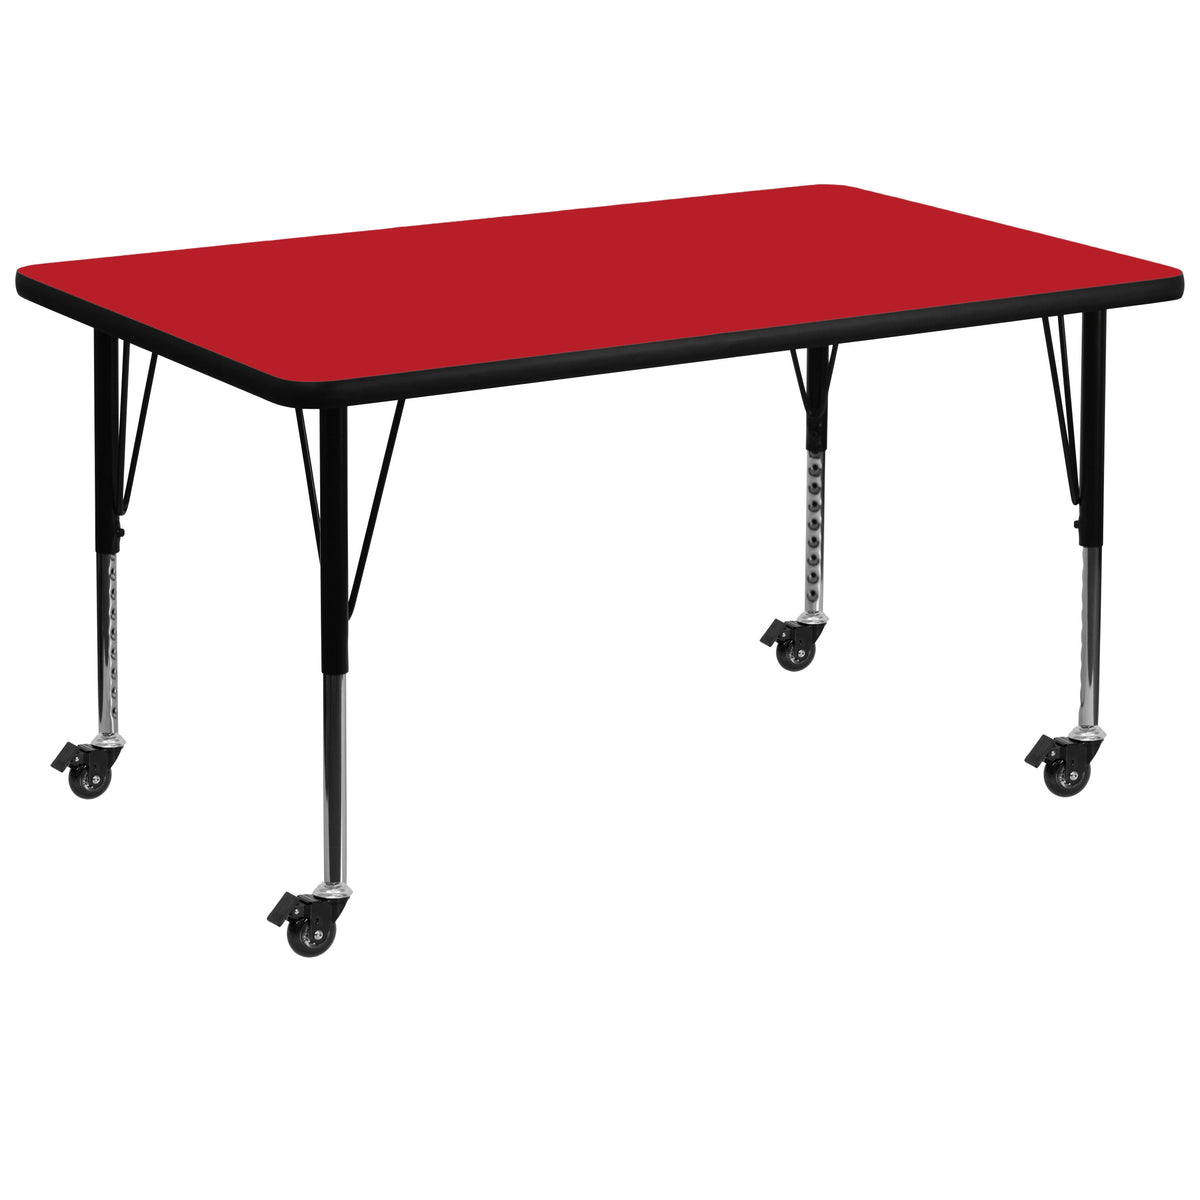 Red |#| Mobile 36inchW x 72inchL Rectangular Red HP Laminate Adjustable Activity Table